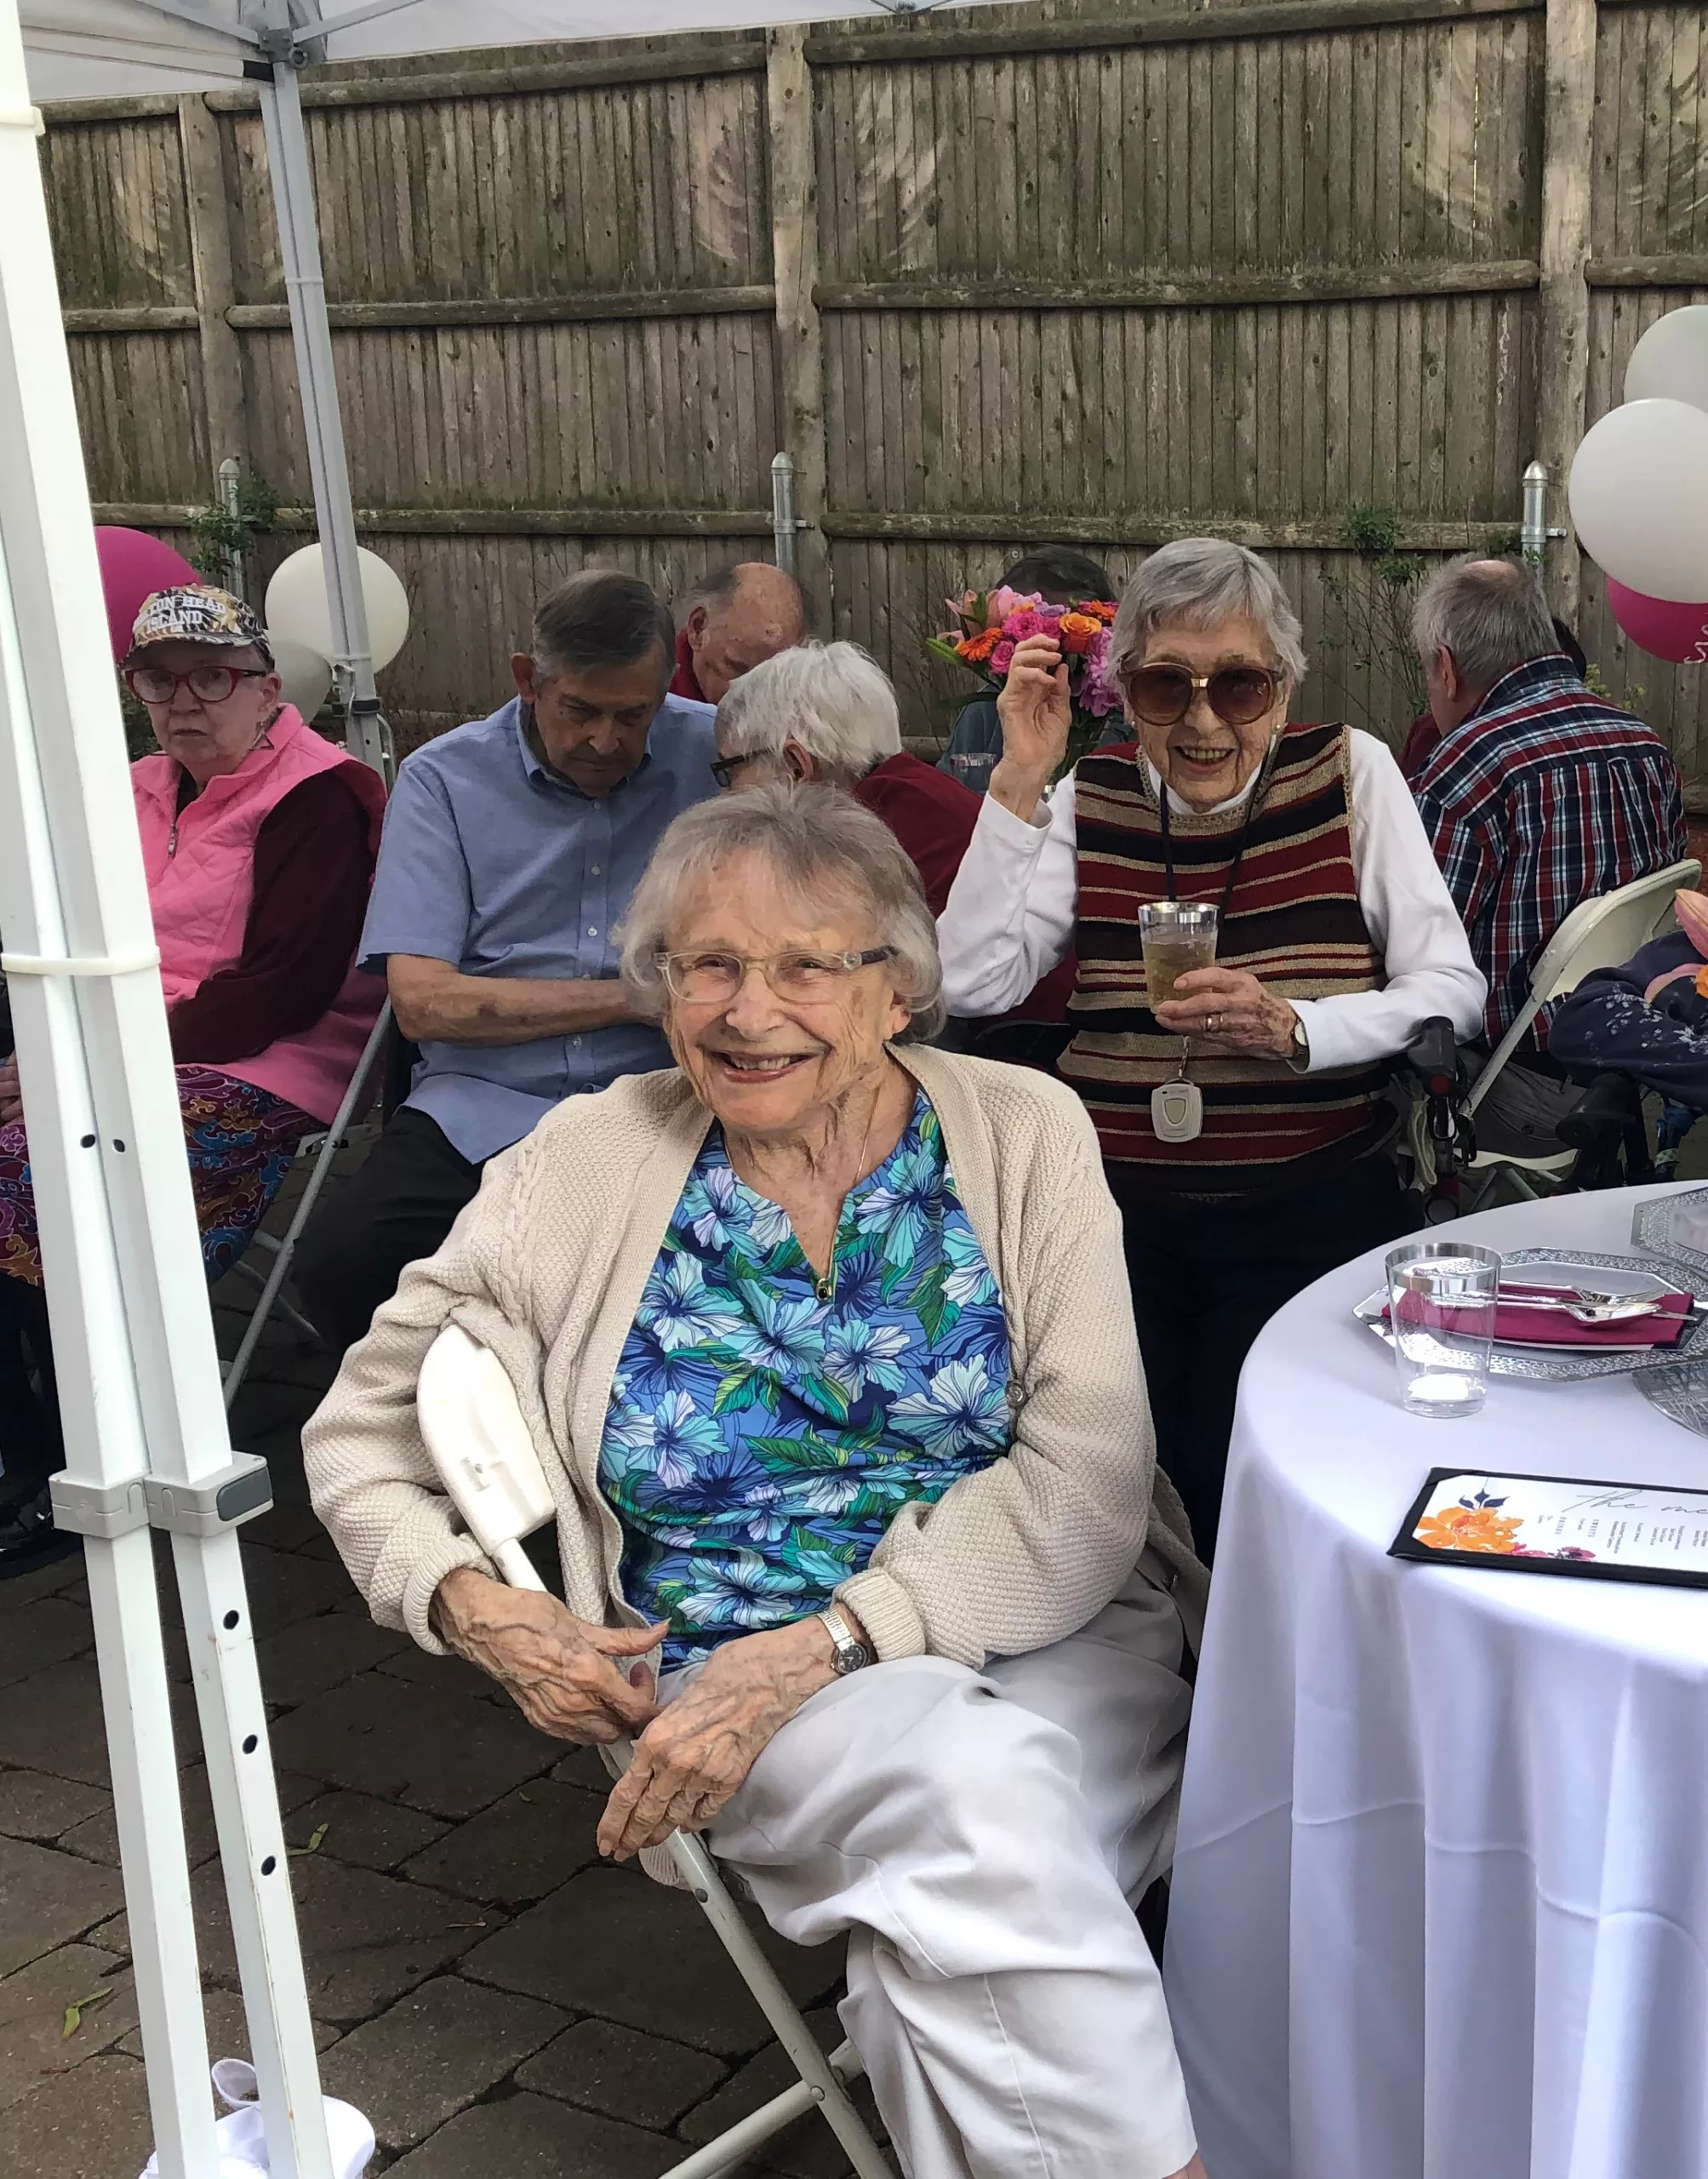 Youville residents enjoying the party.